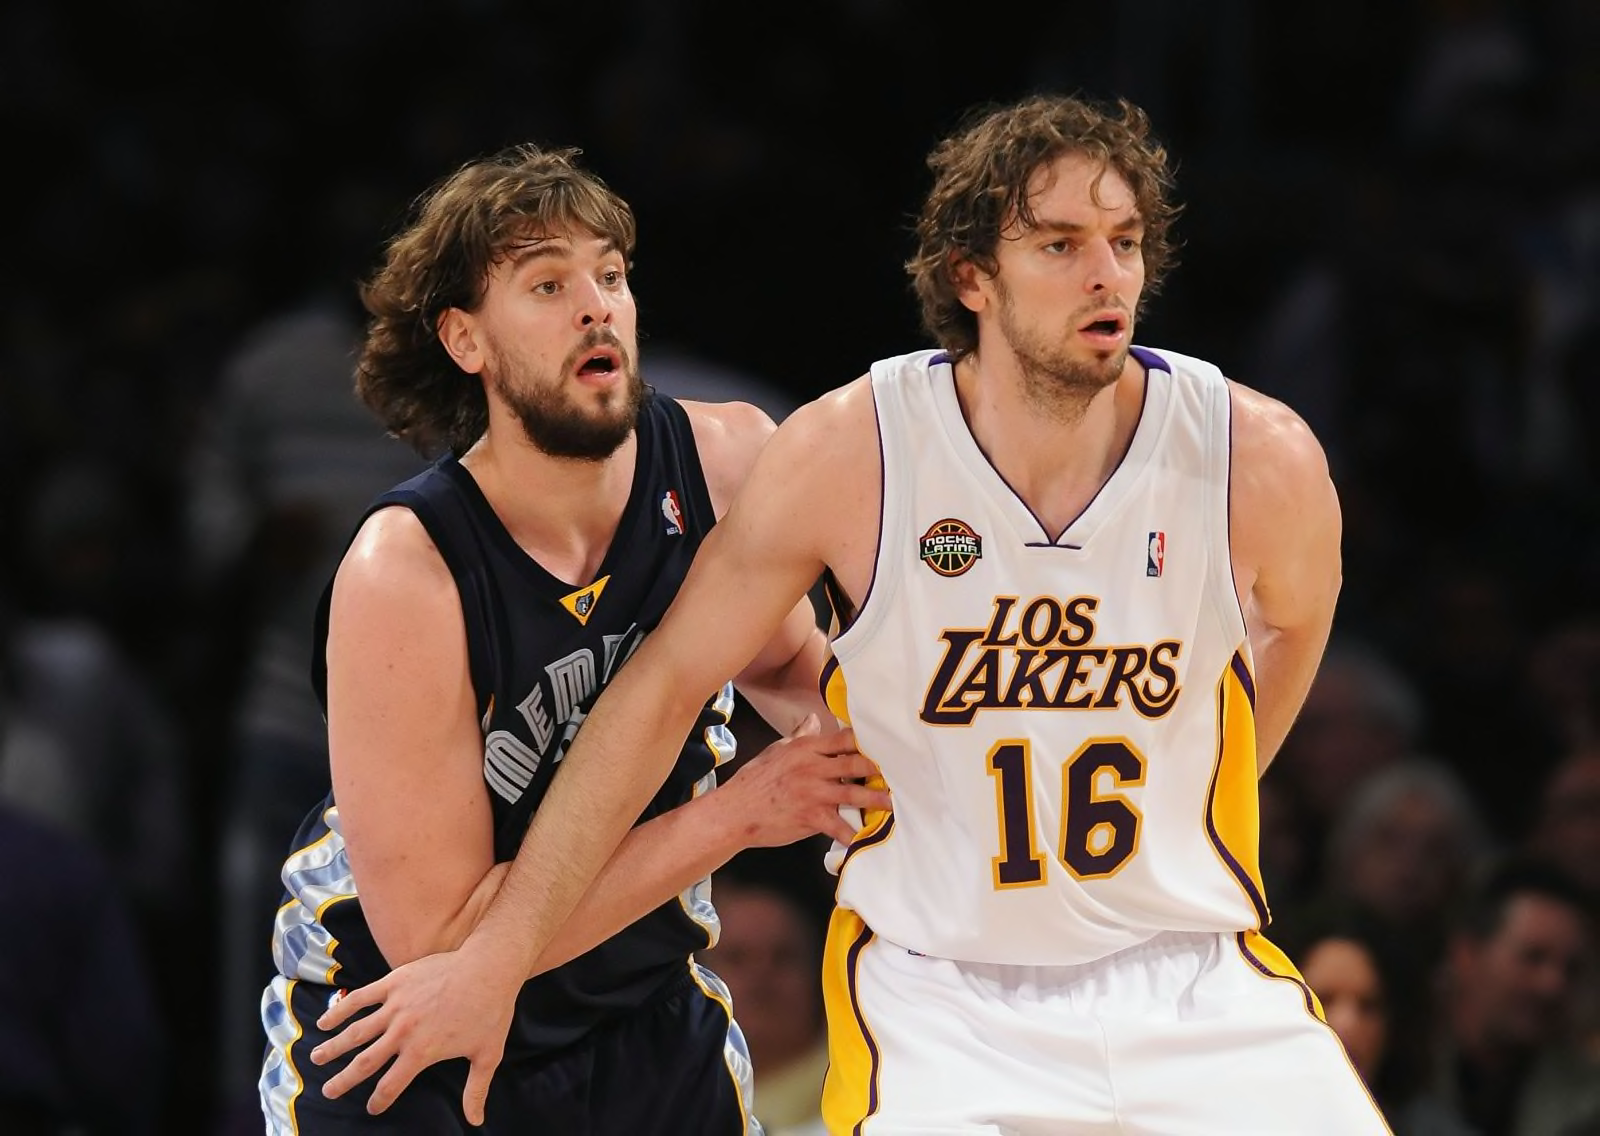 Lakers move on with Marc Gasol likely heading back to Spain - Los